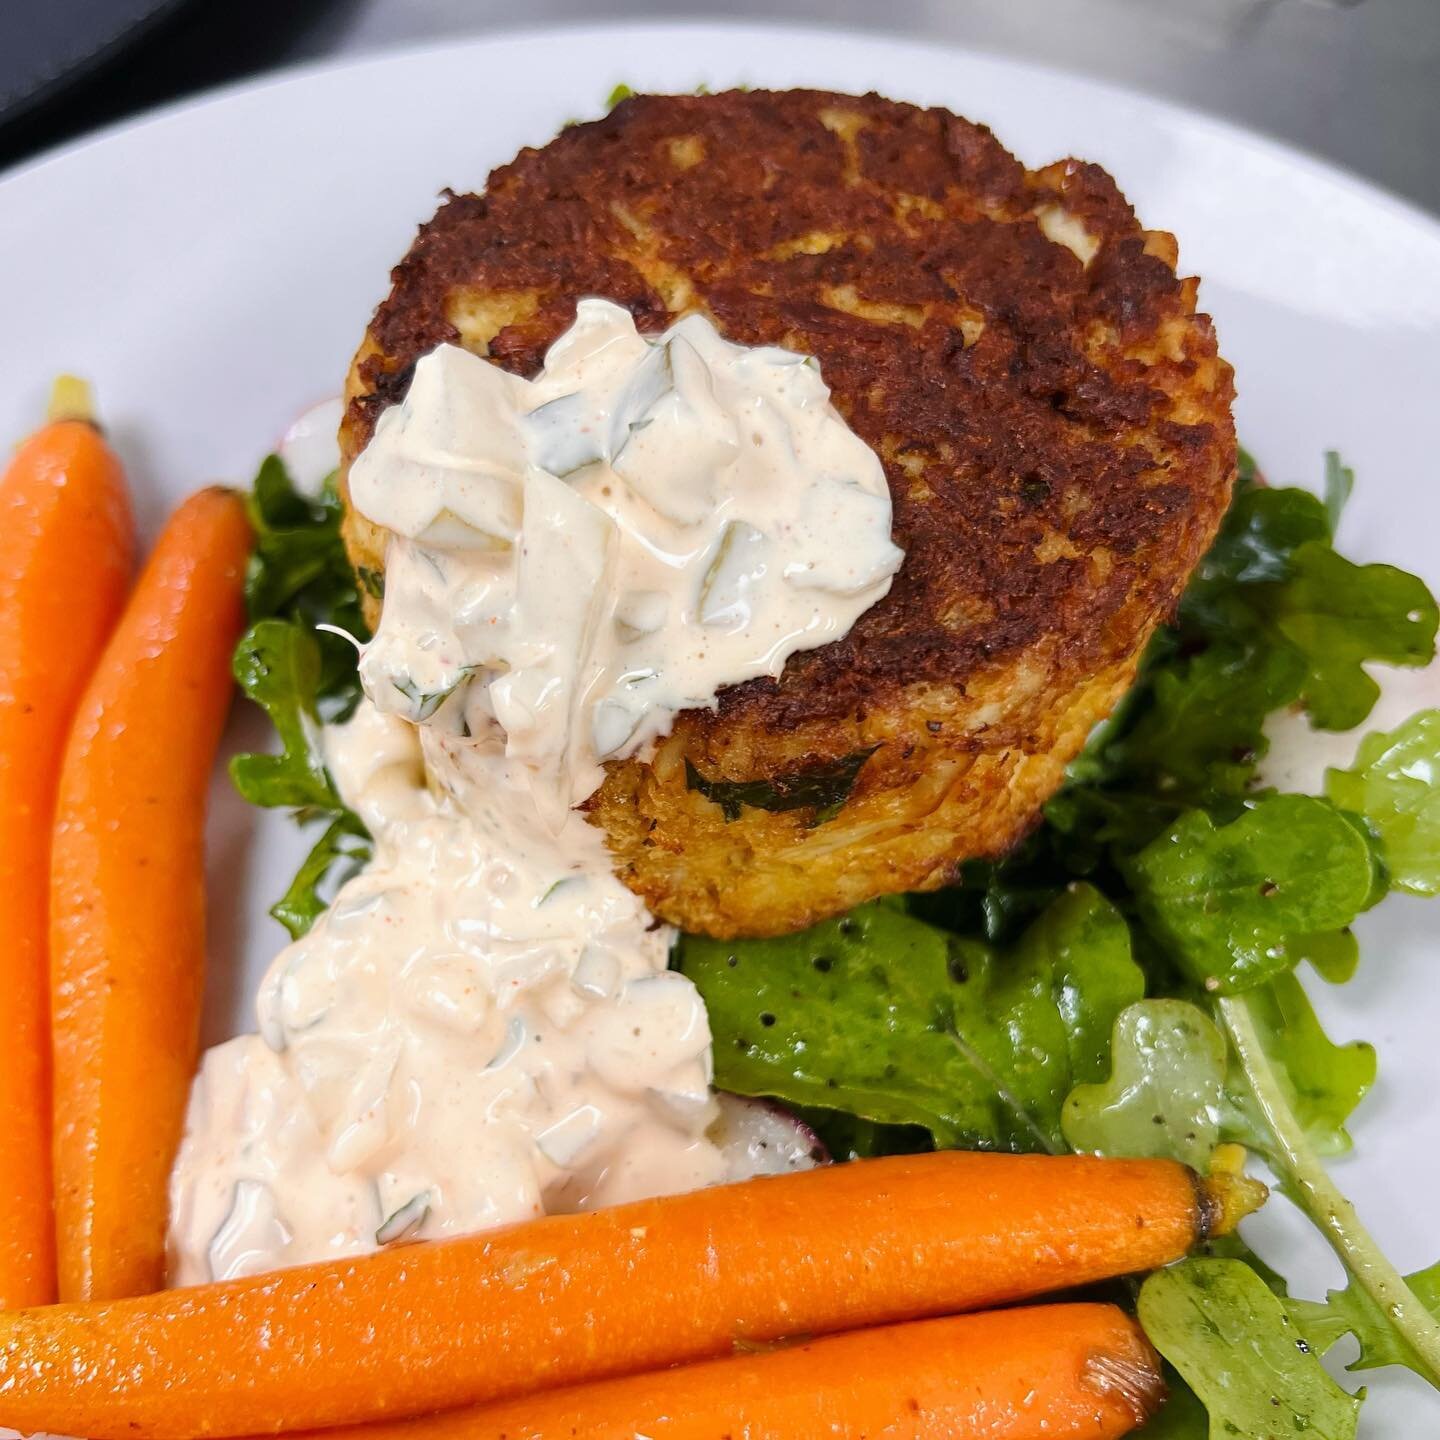 Lump crab cake served on P&amp;A arugula &amp; radish with steamed baby carrots &amp; pickle remoulade🤗